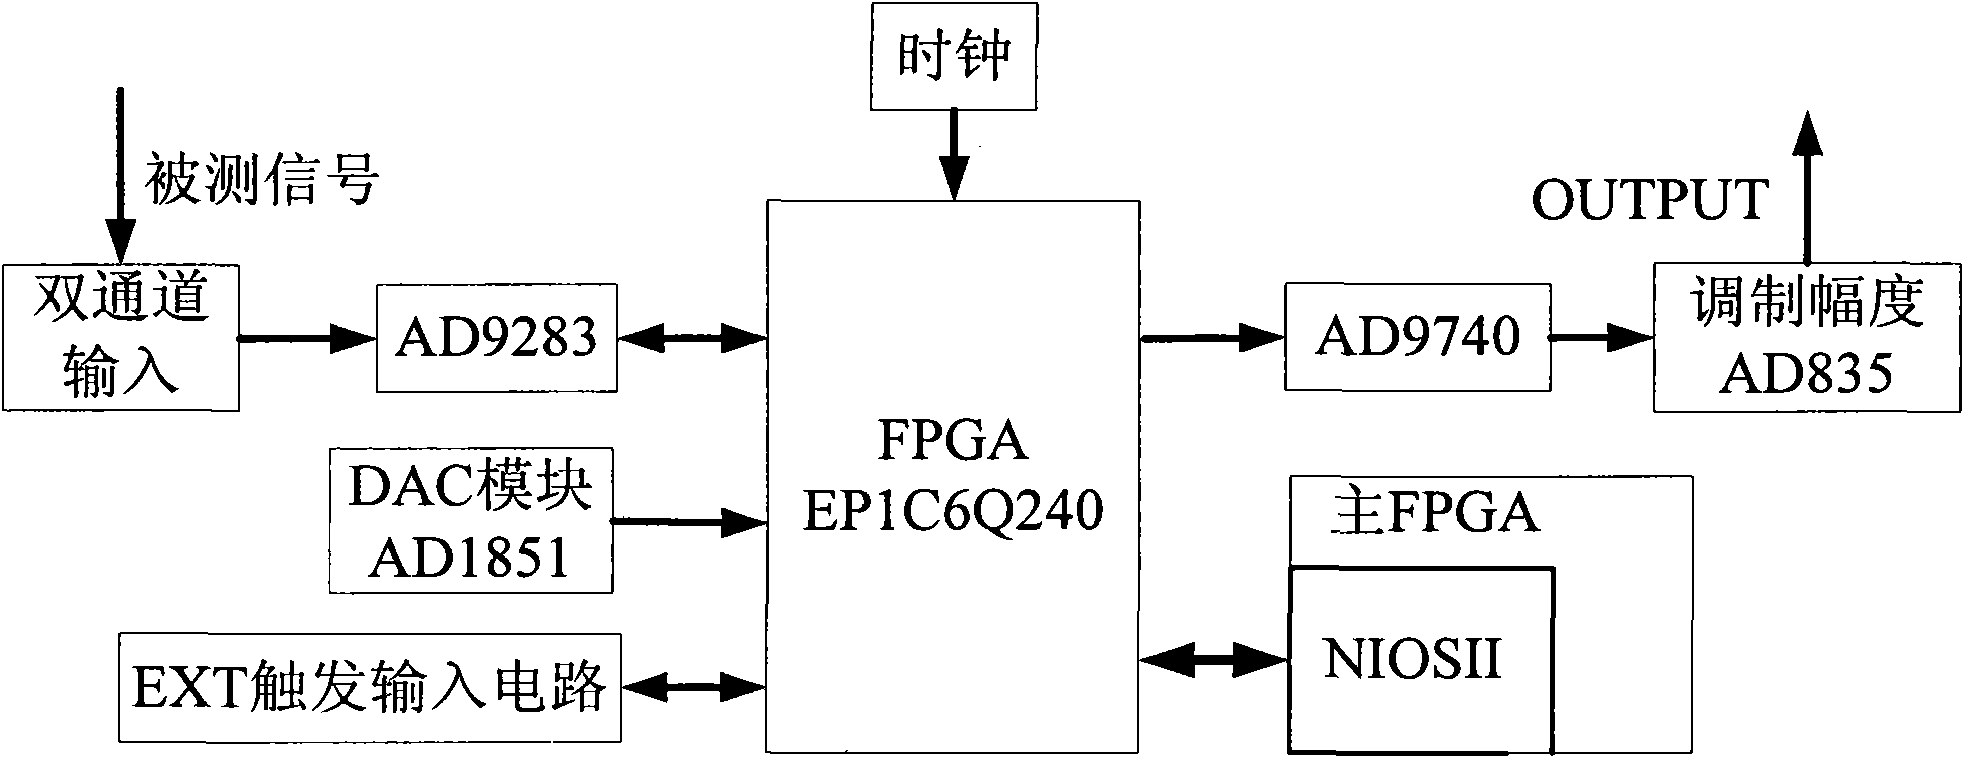 Embedded computer electrometric integrated instrument